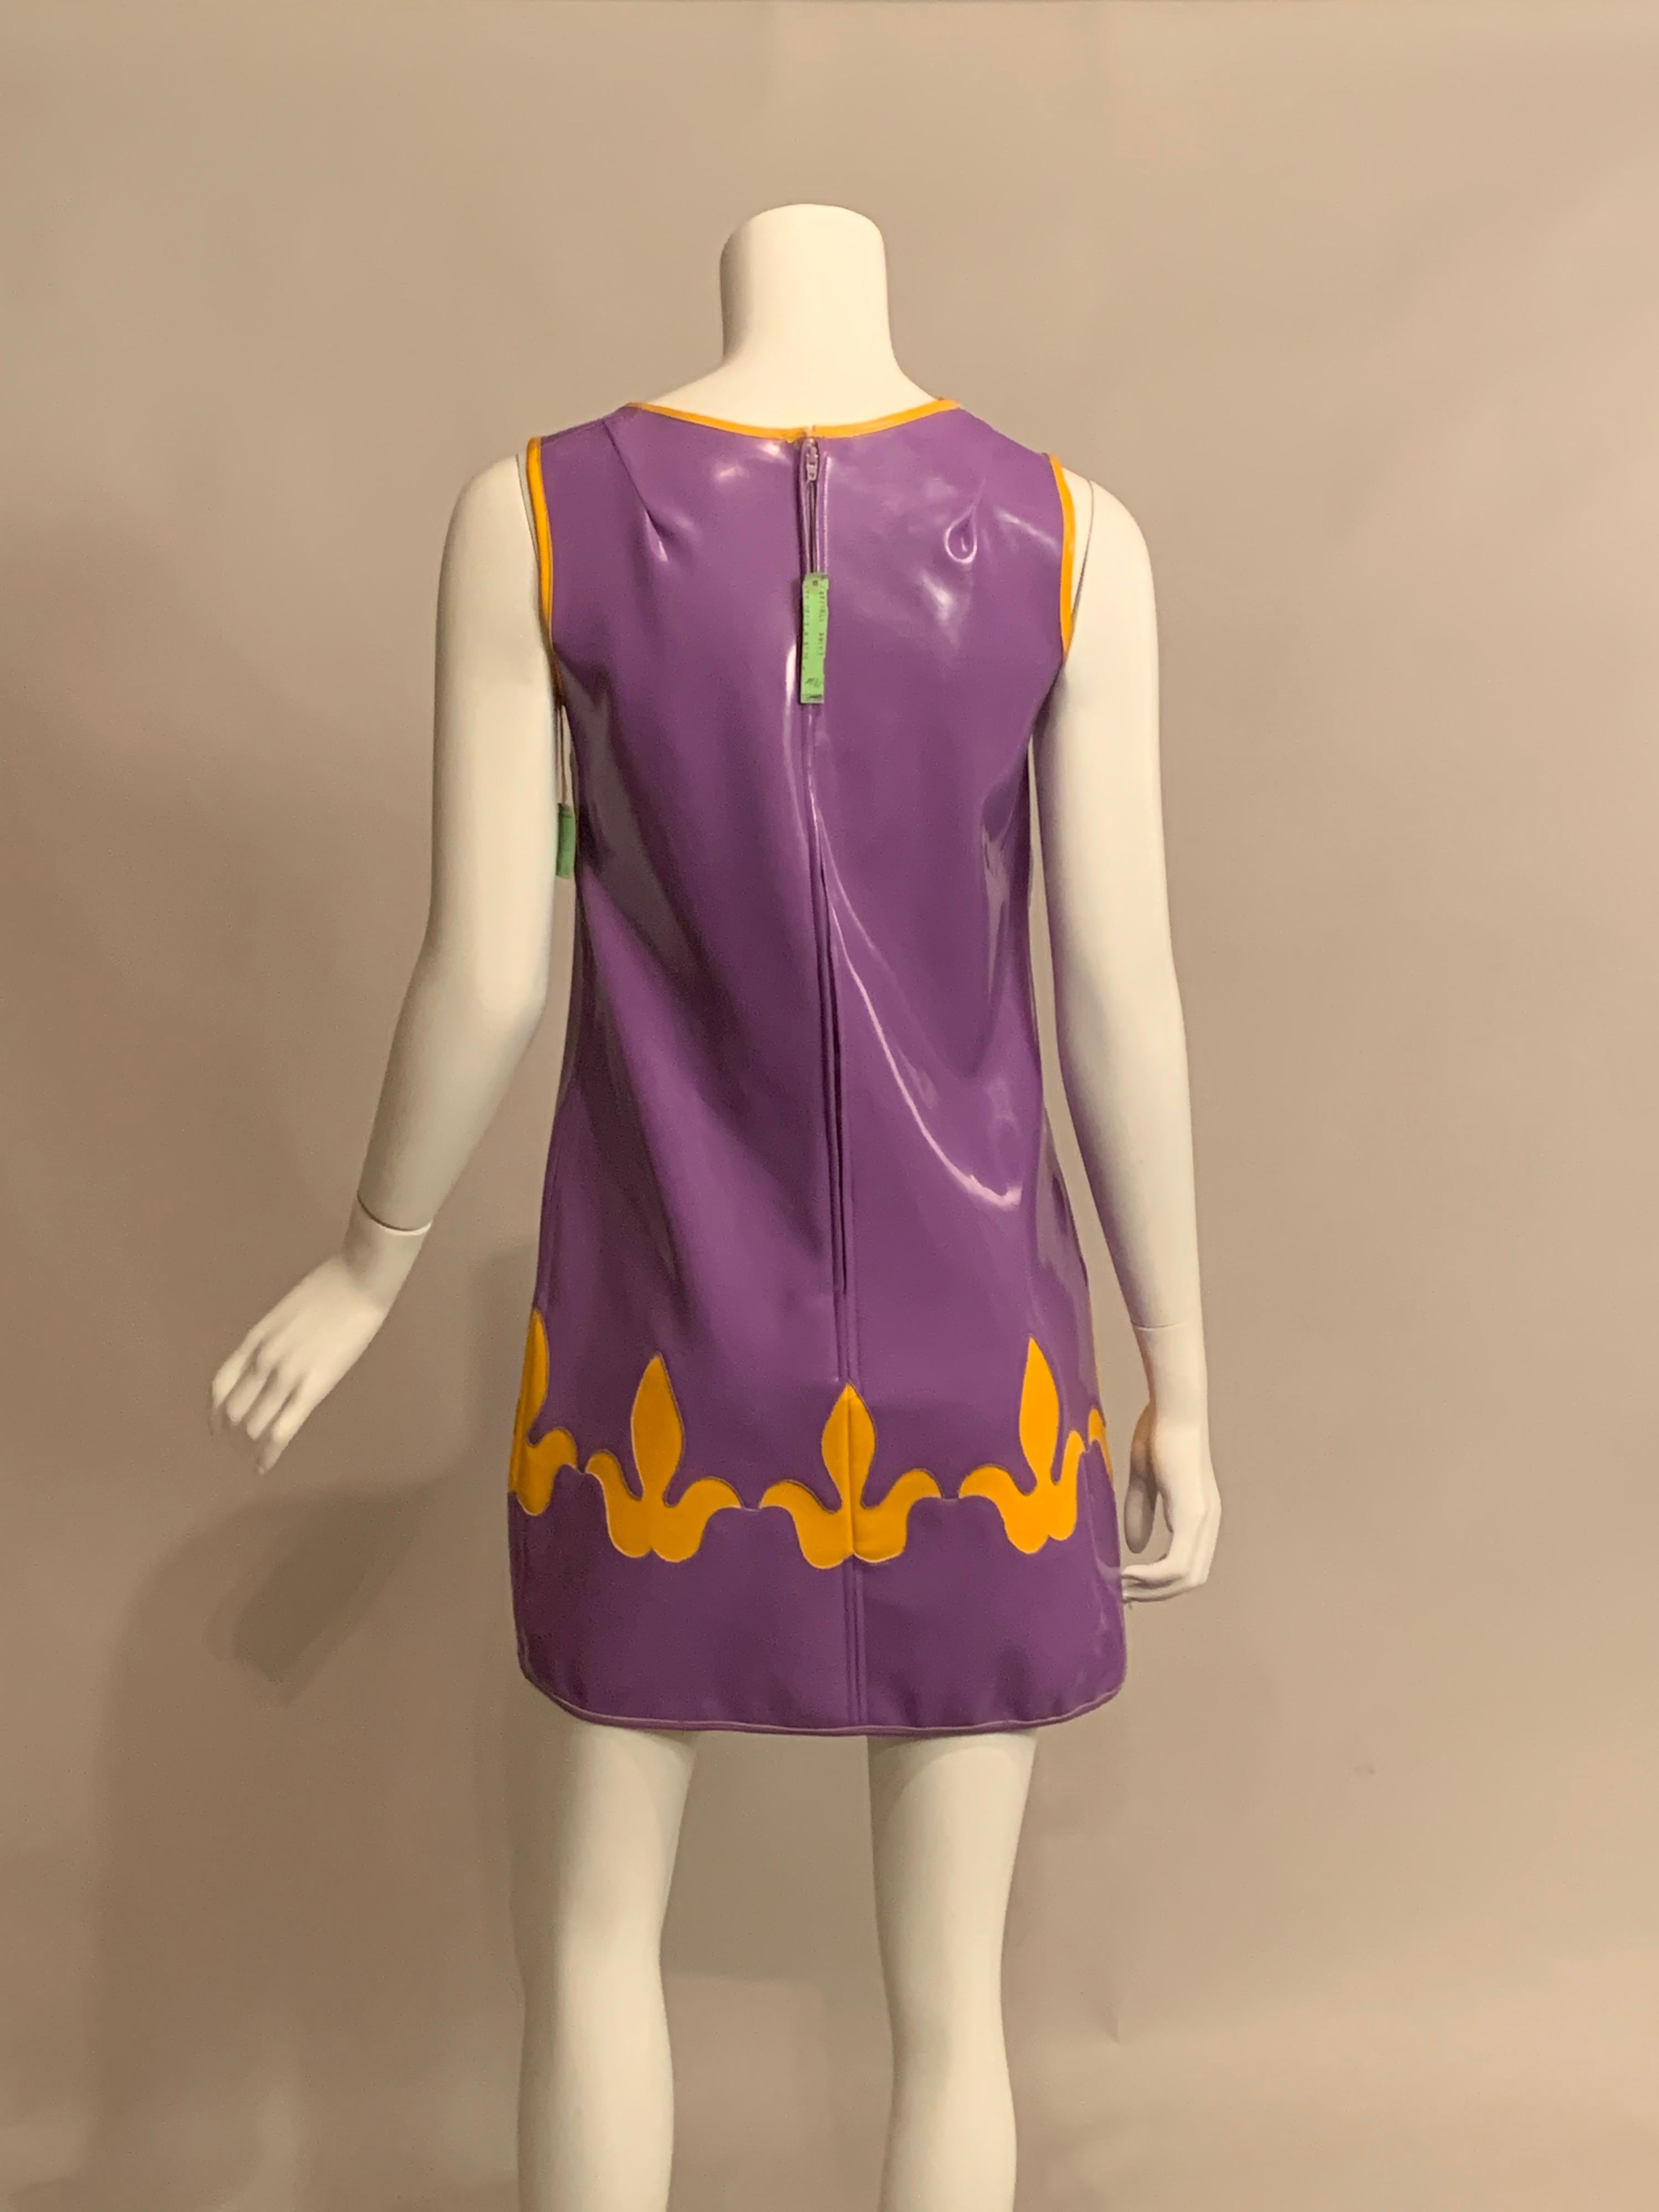 Women's 1960’s Tuffin and Foale Youthquake Lavender and Yellow Vinyl Dress Never Worn